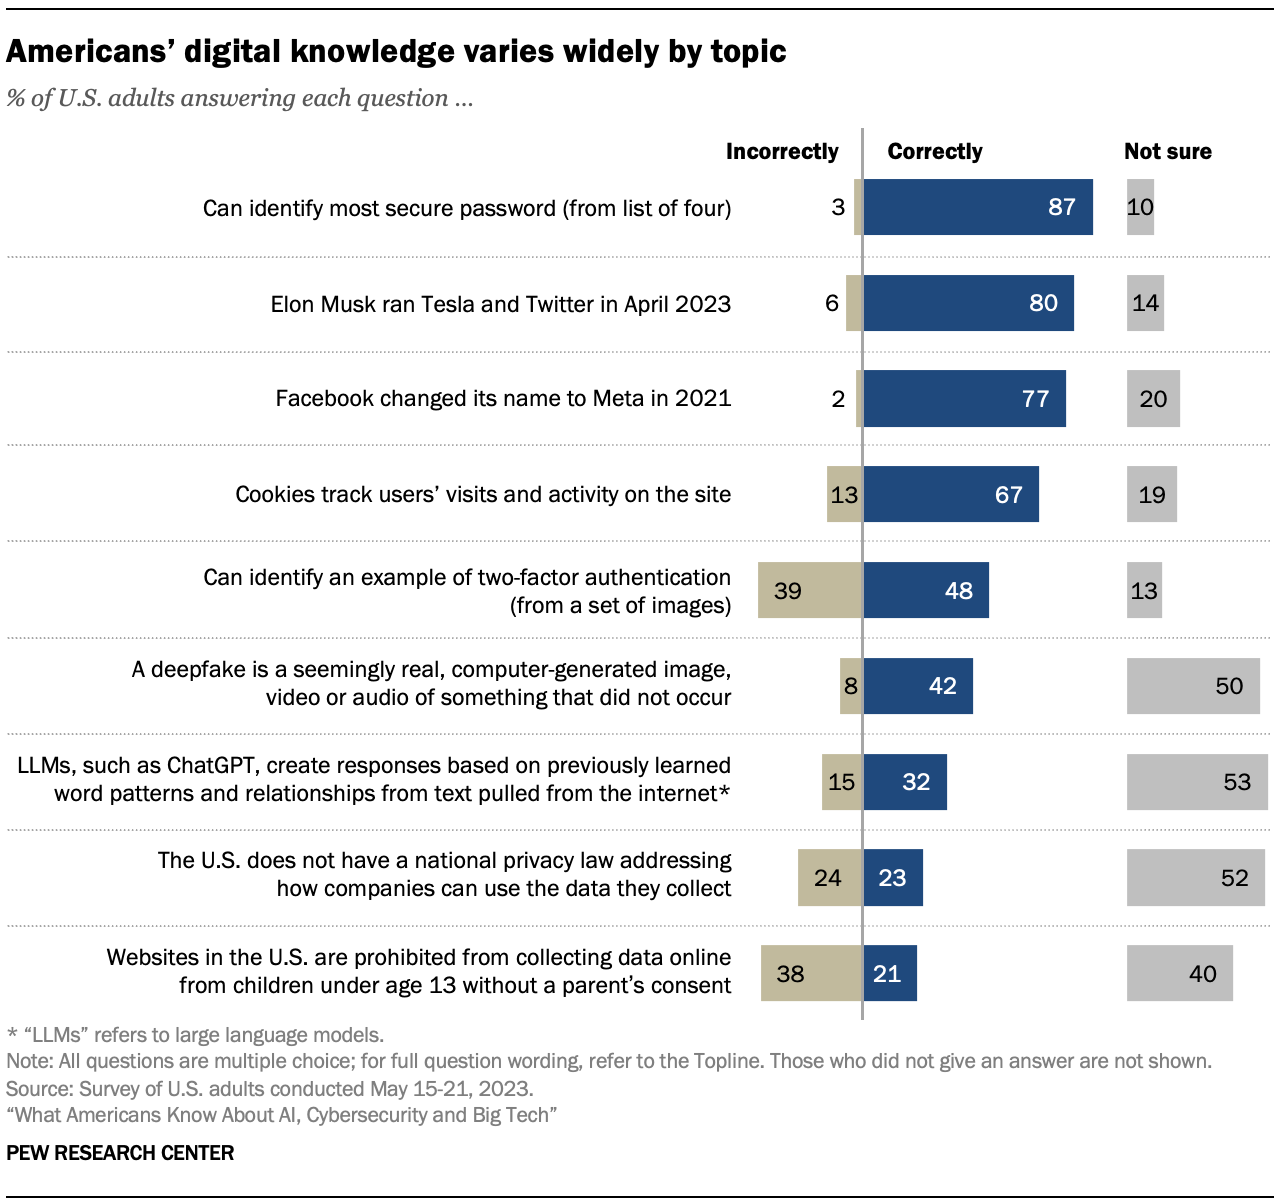 Americans' digital literacy varies widely by subject;  87% of U.S. adults can identify the most secure password from a list of four, but only 21% of U.S. adults know that U.S. websites are prohibited from collecting online data from children under 13 years without parental consent.